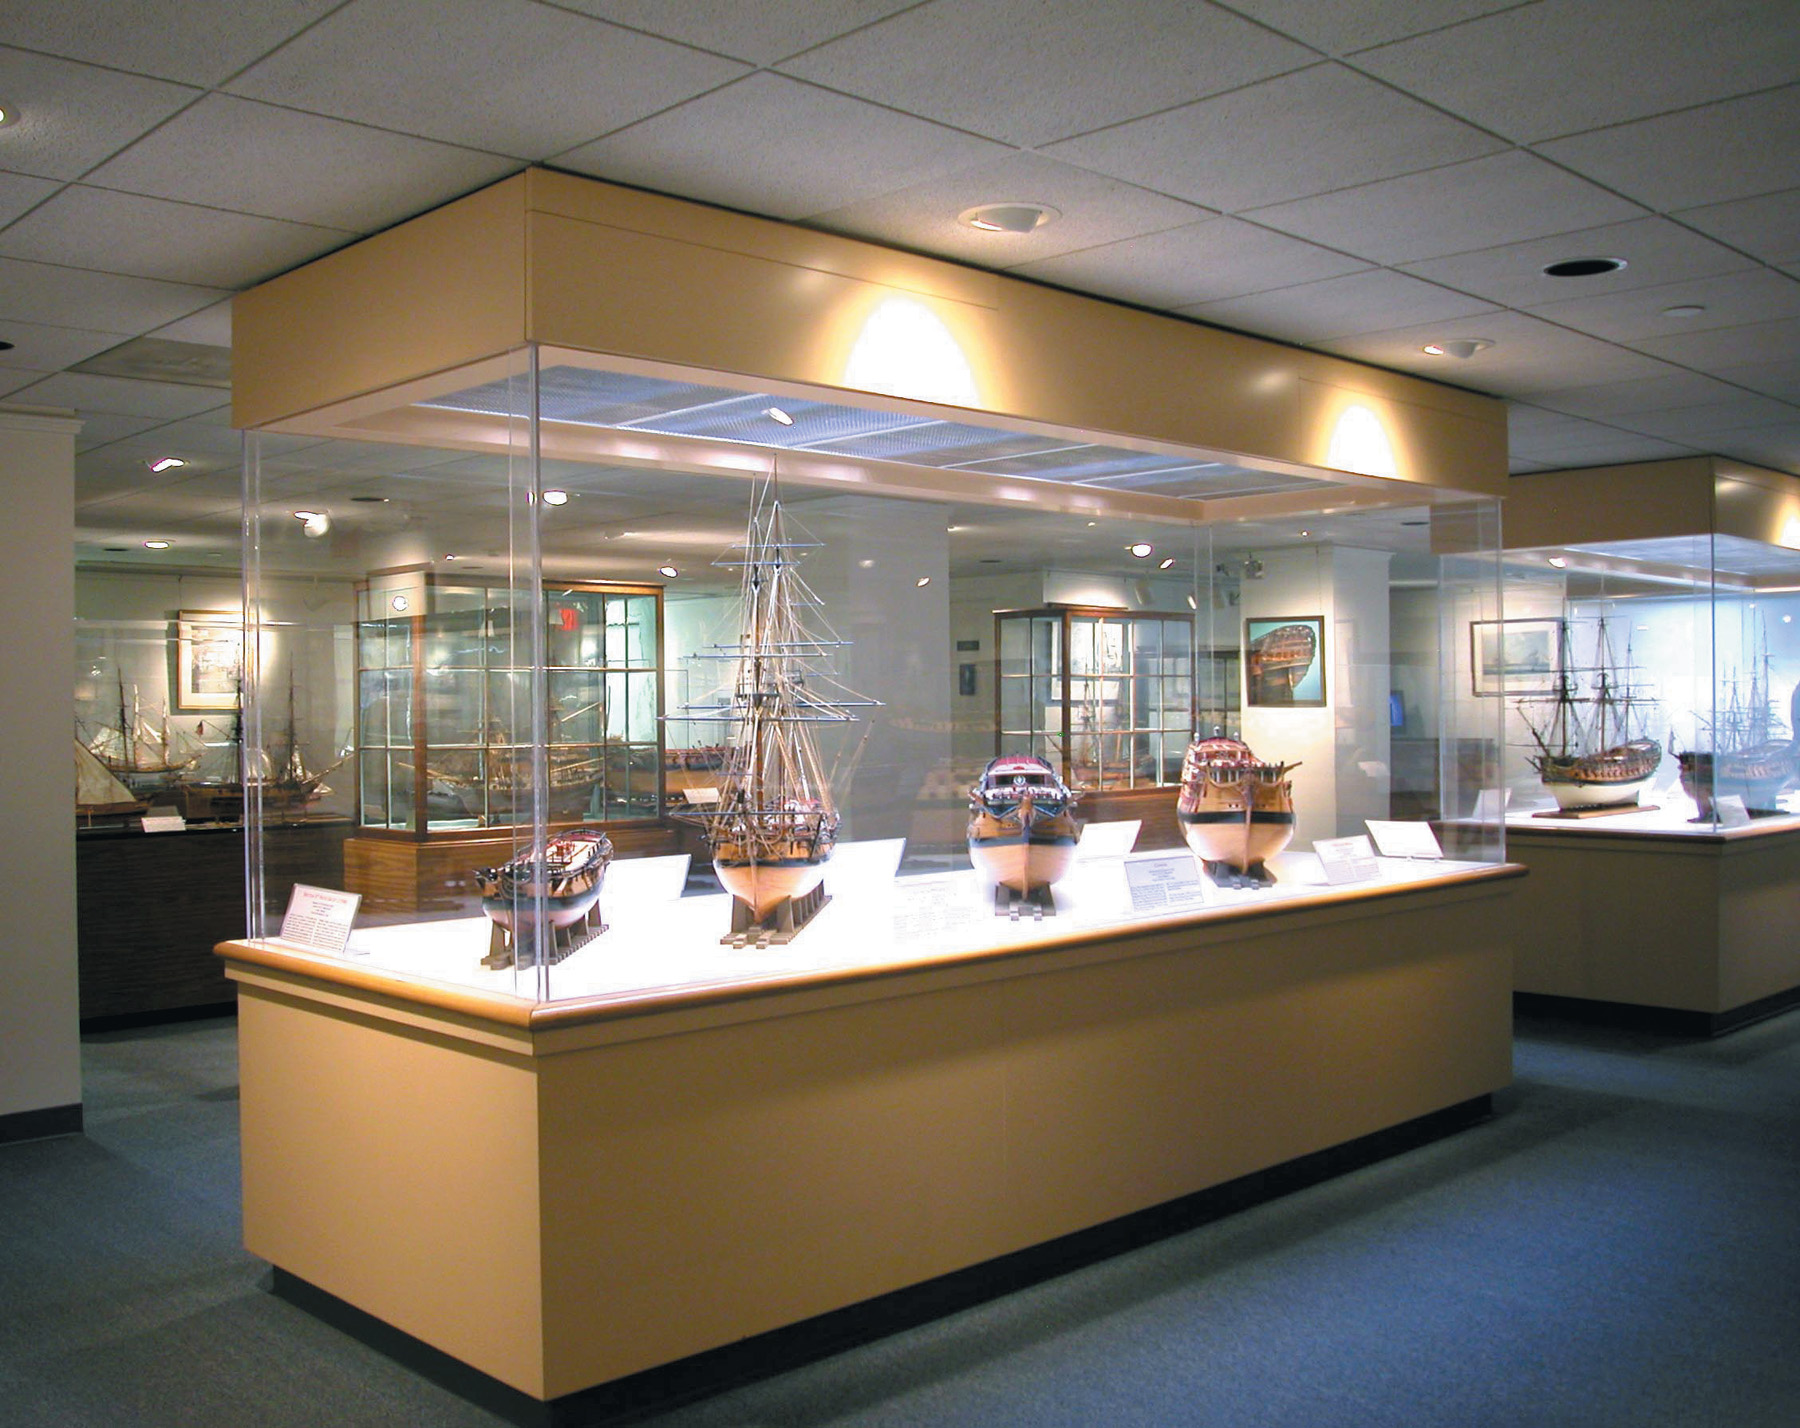 The first floor of Preble Hall holds the museum’s varied model ship collection, which includes 108 ship and boat models of the sailing ship era from 1650-1850. 